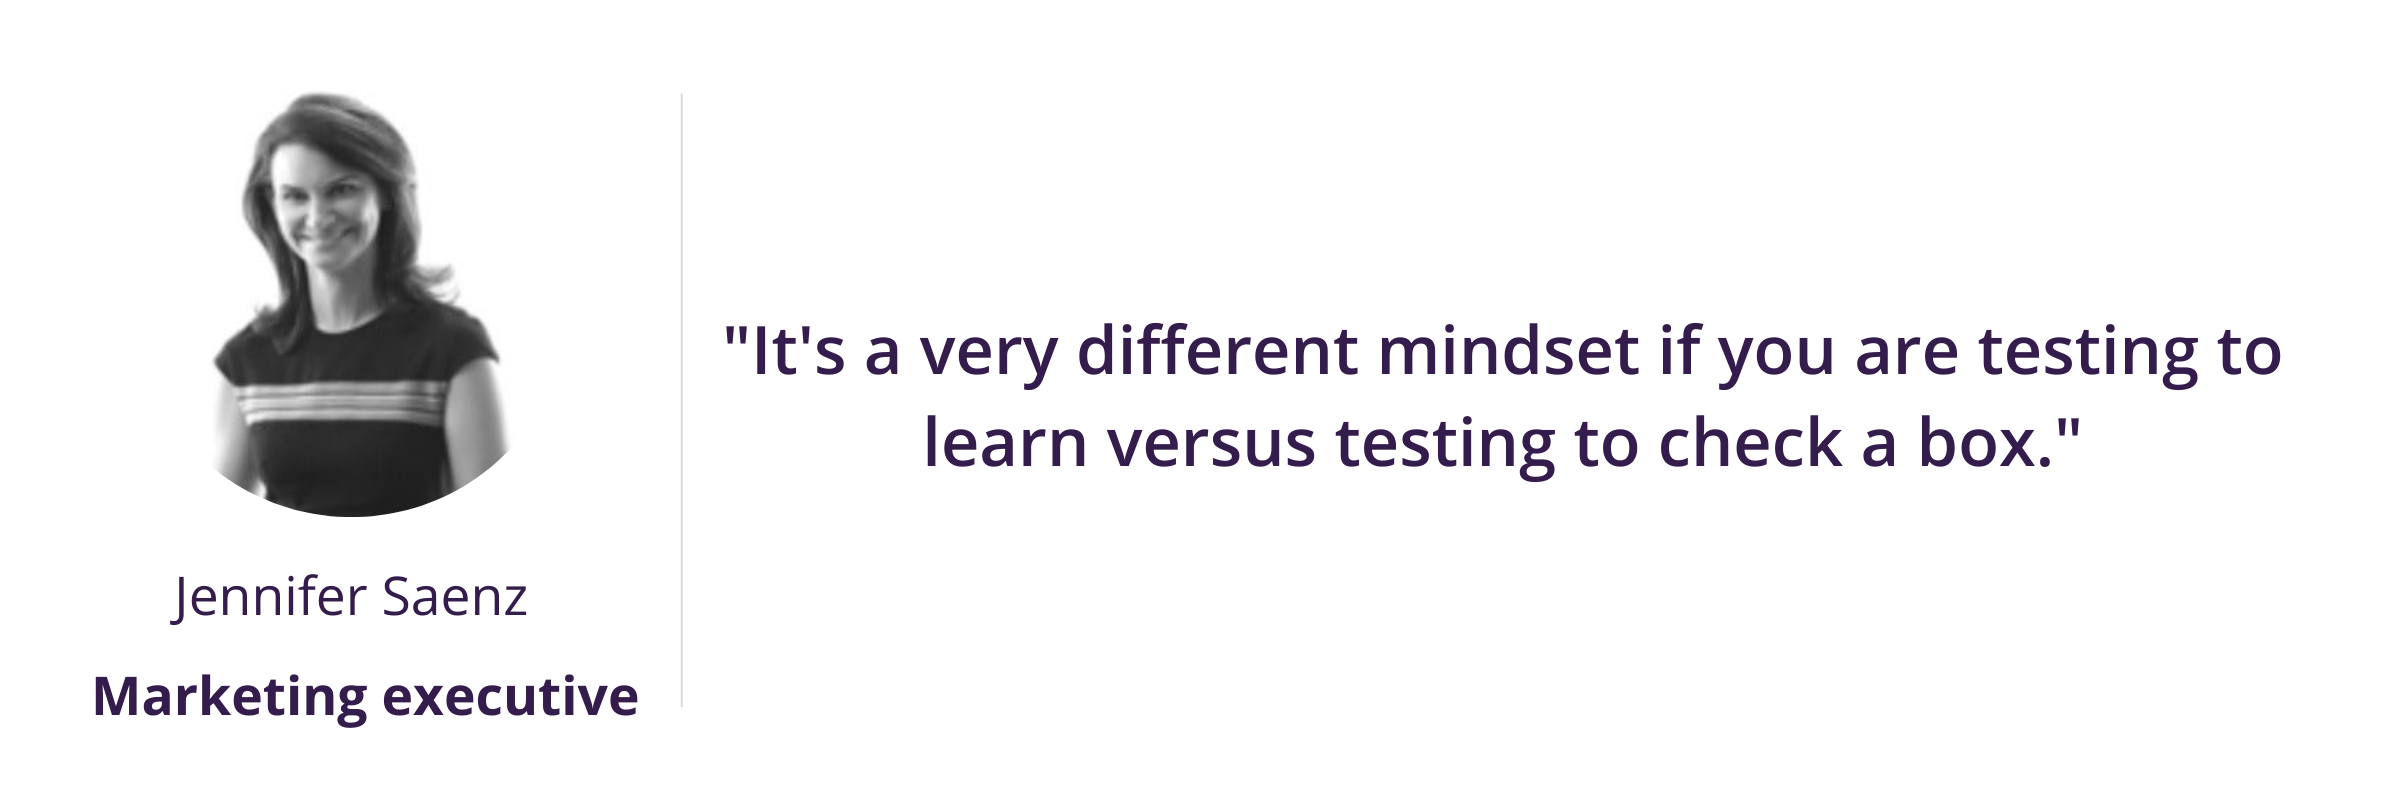 insight trends: "It's a very different mindset if you are testing to learn versus testing to check a box."